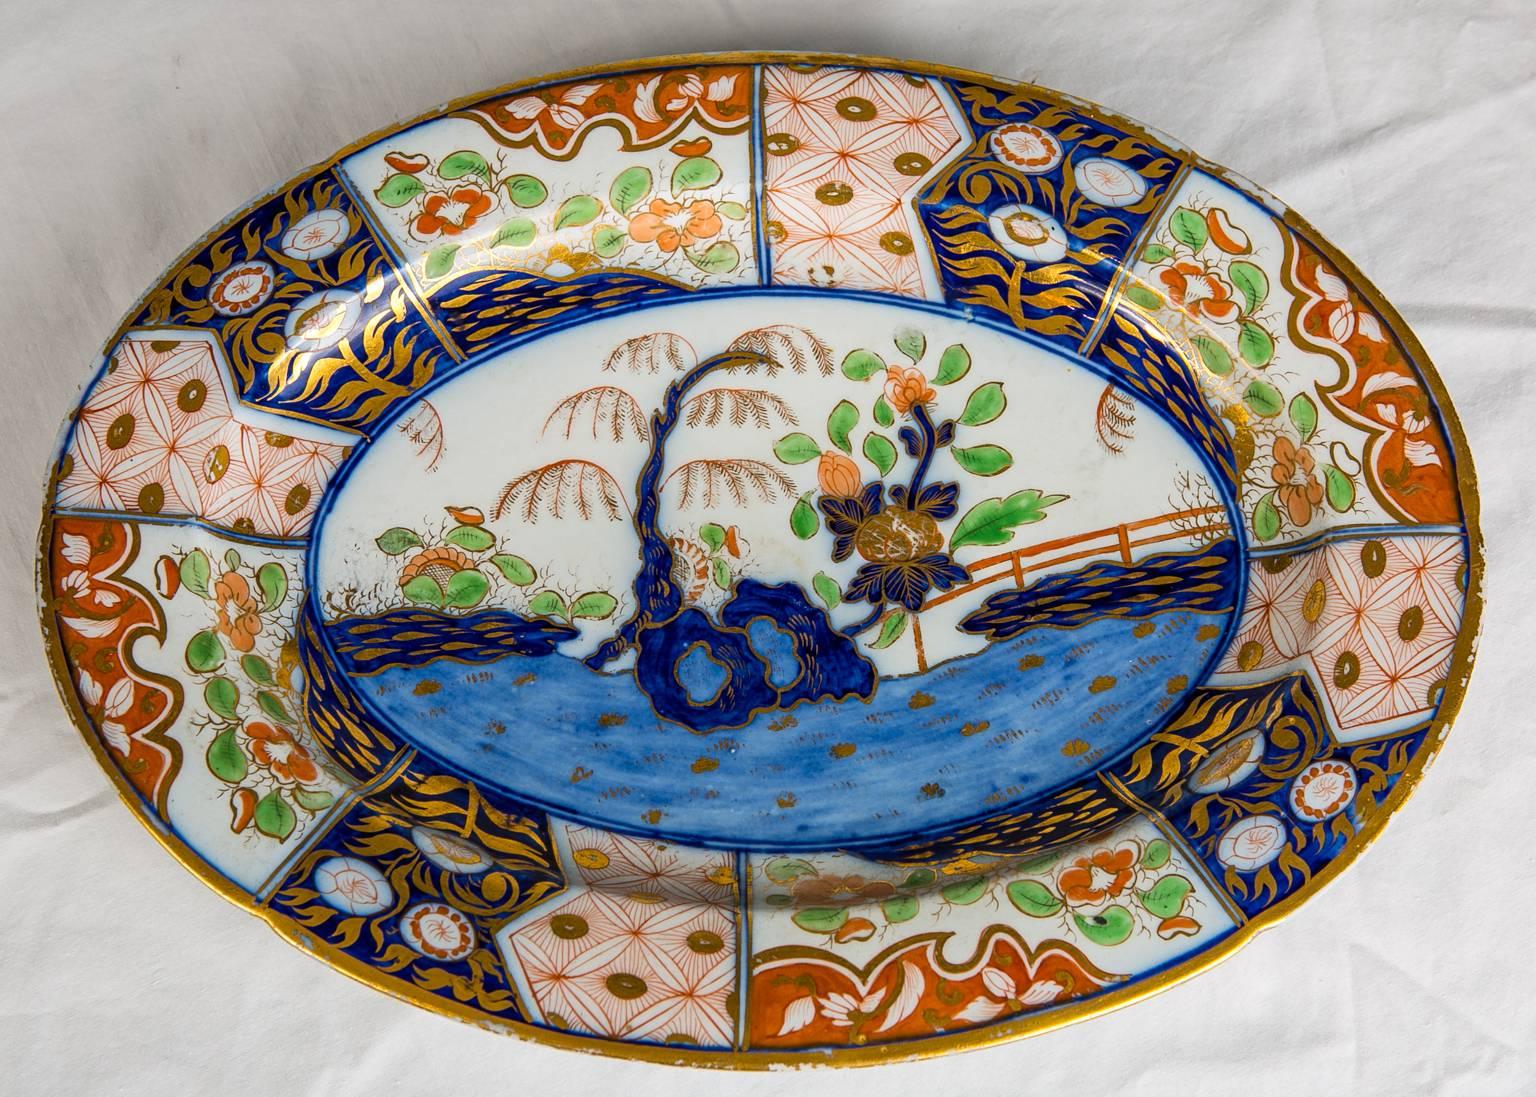 A Spode soup tureen made in England in the early 19th century.
This popular pattern features a vibrant hand-painted scene showing a fenced garden with peonies and a willow tree with golden branches. The pattern is known by several names; Rock and